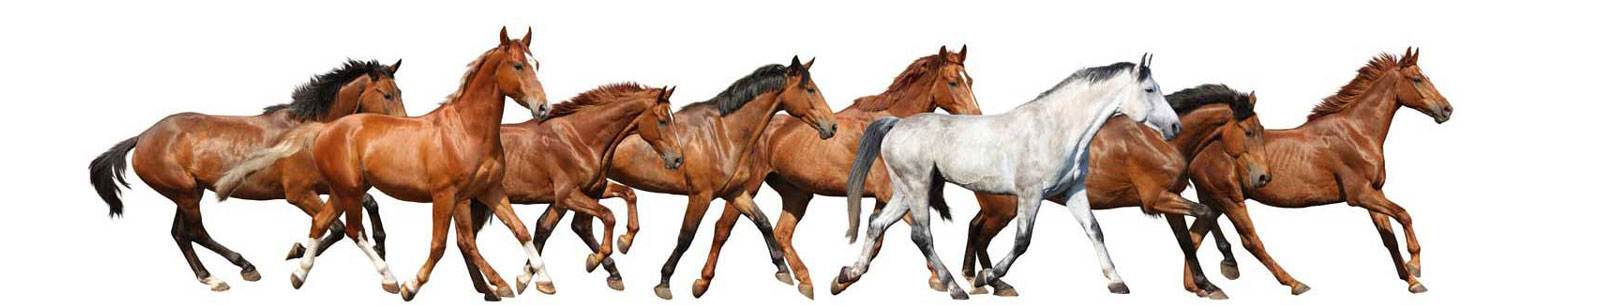 Horses in Canada, free classified ads and advertising opportunities